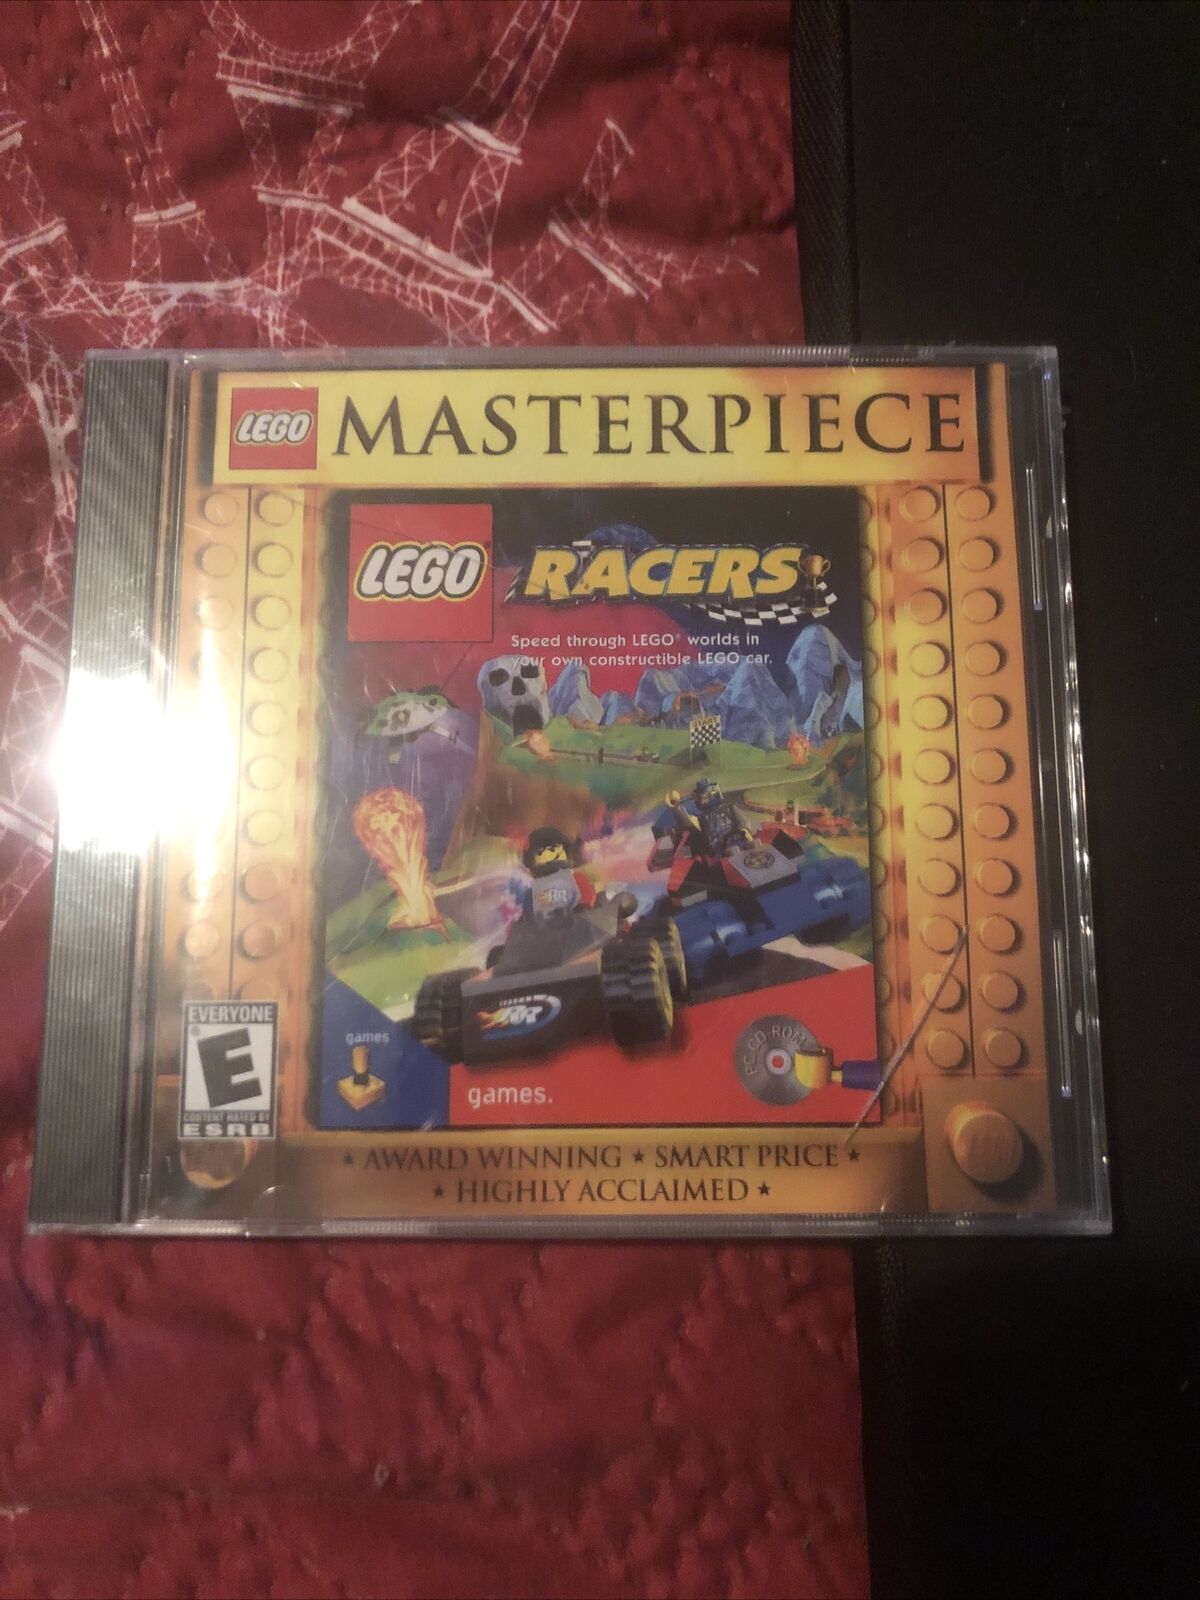 LEGO MASTERPIECE RACERS CD-ROM BY SCHOLASTIC 1999-2000, ELECTRONIC ARTS SEALED